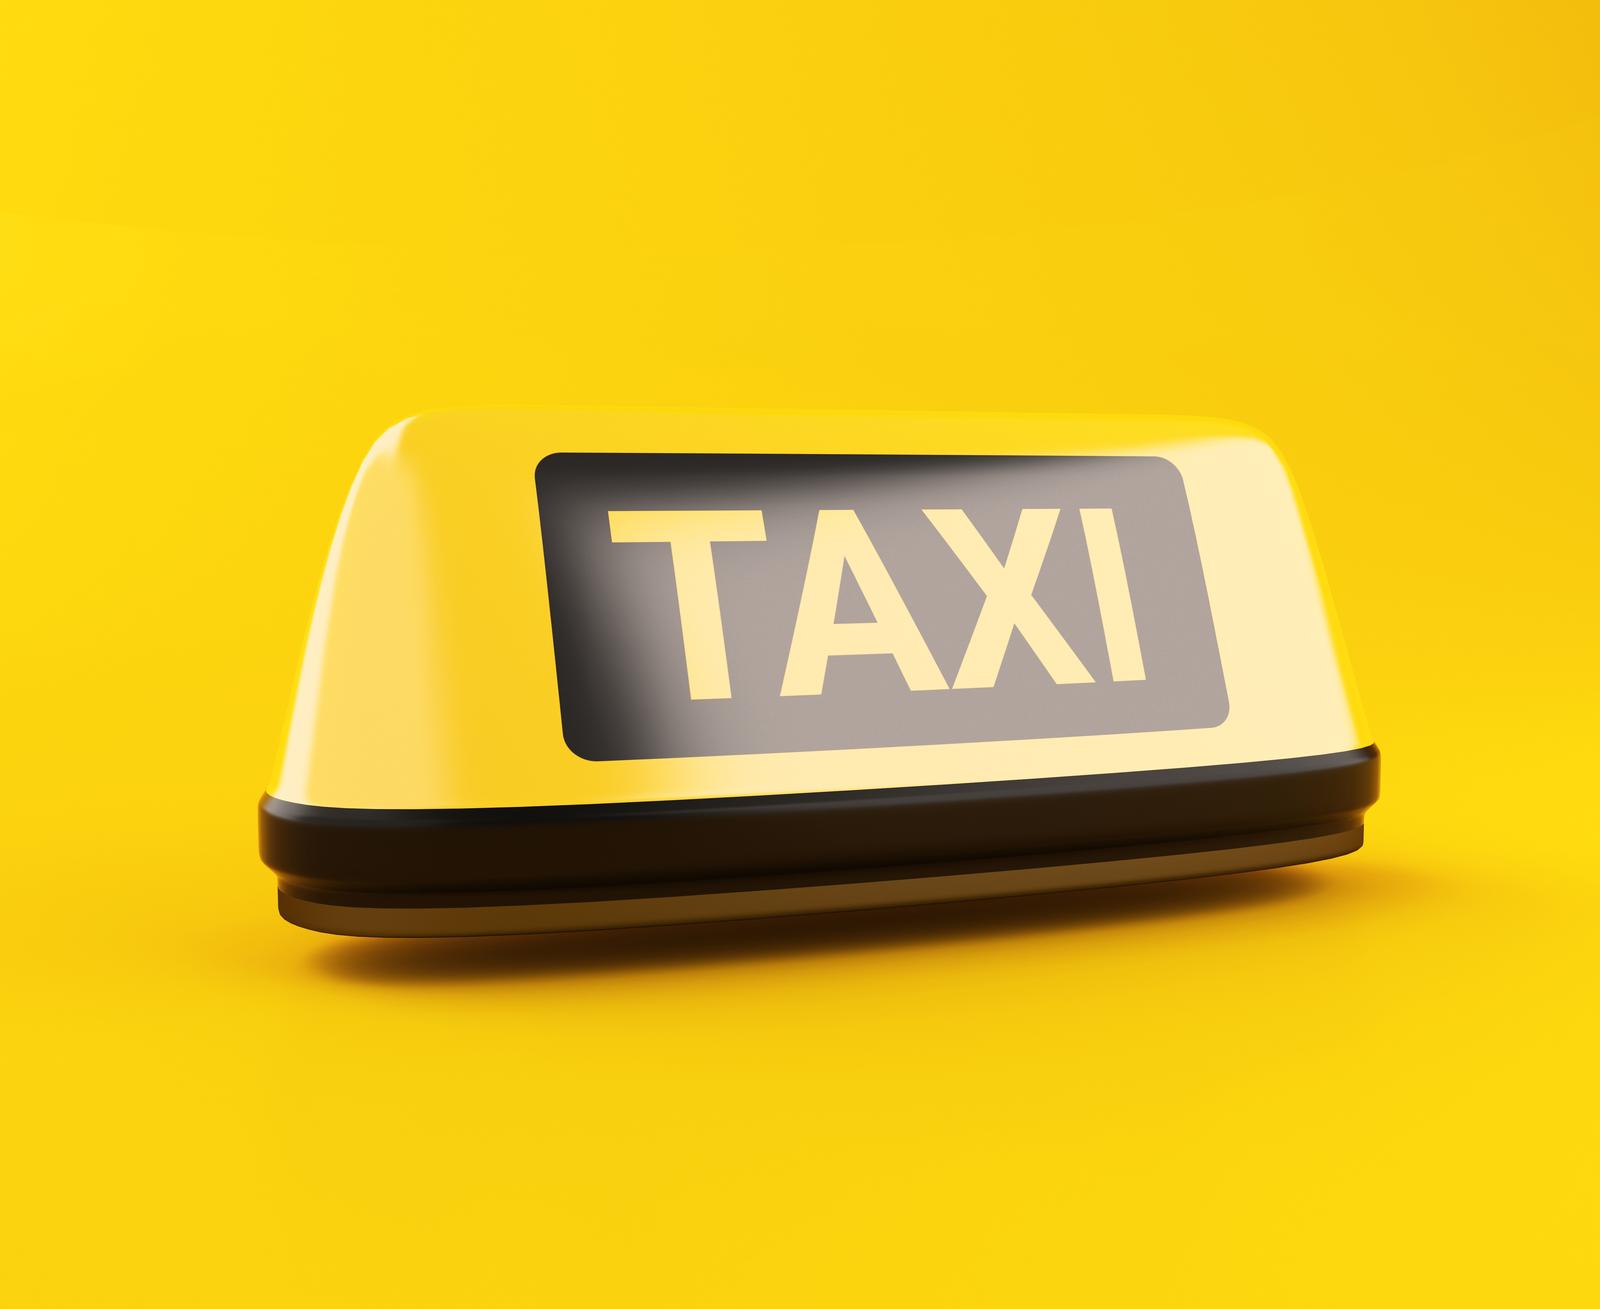 TIIT REINVEE FIE - Taxi operation in Paide